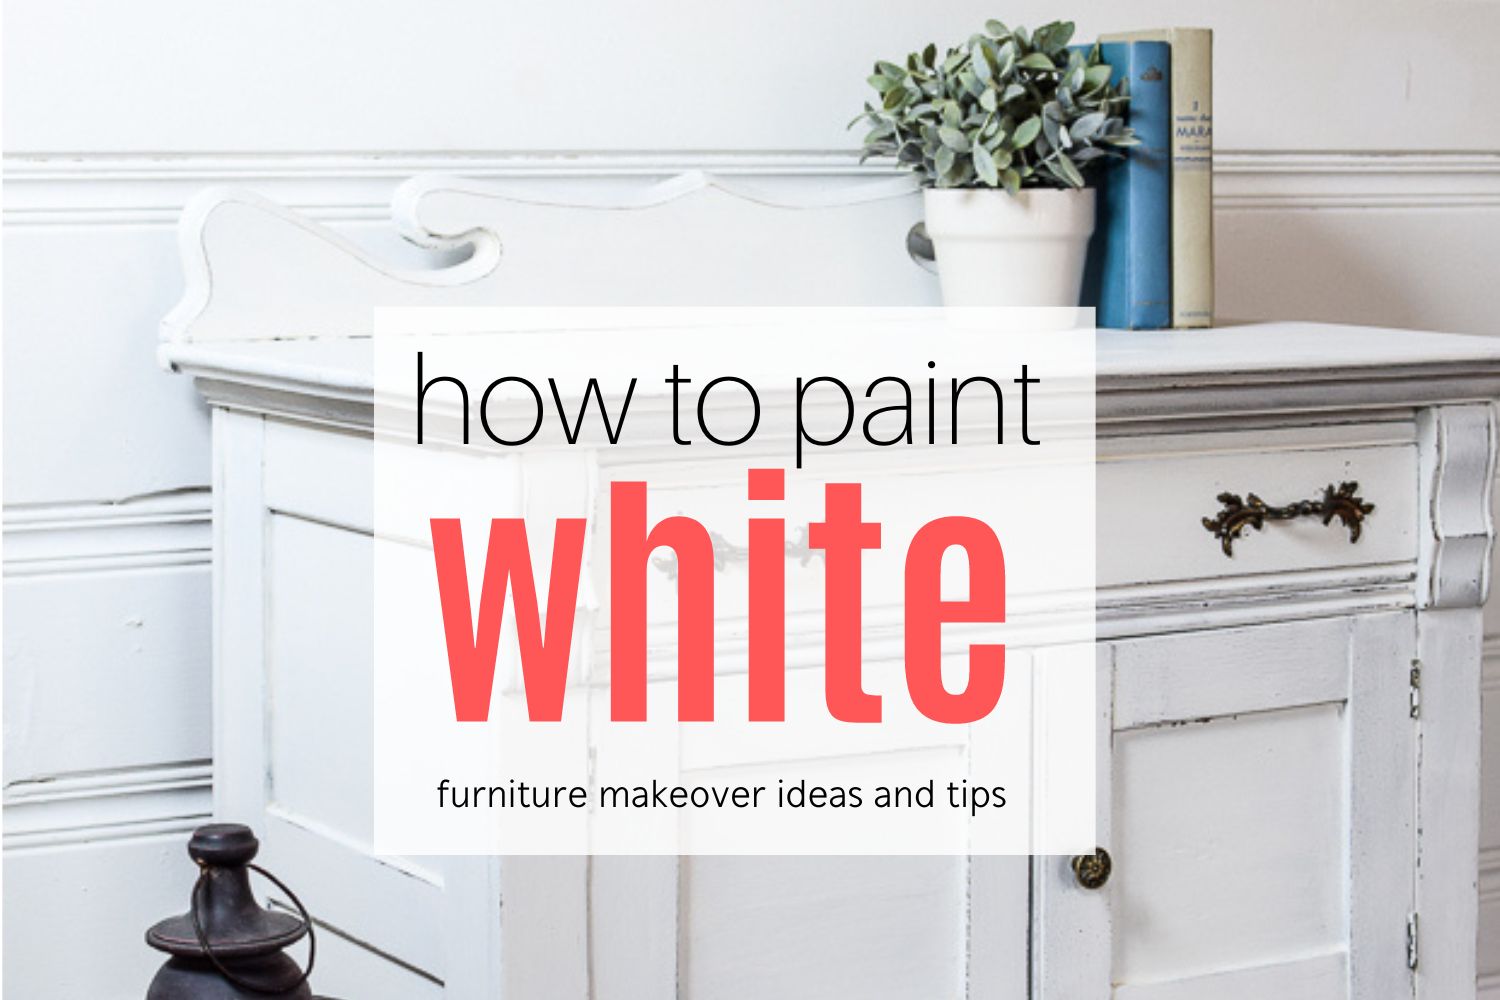 5 Things You Need to Do When Painting Furniture White